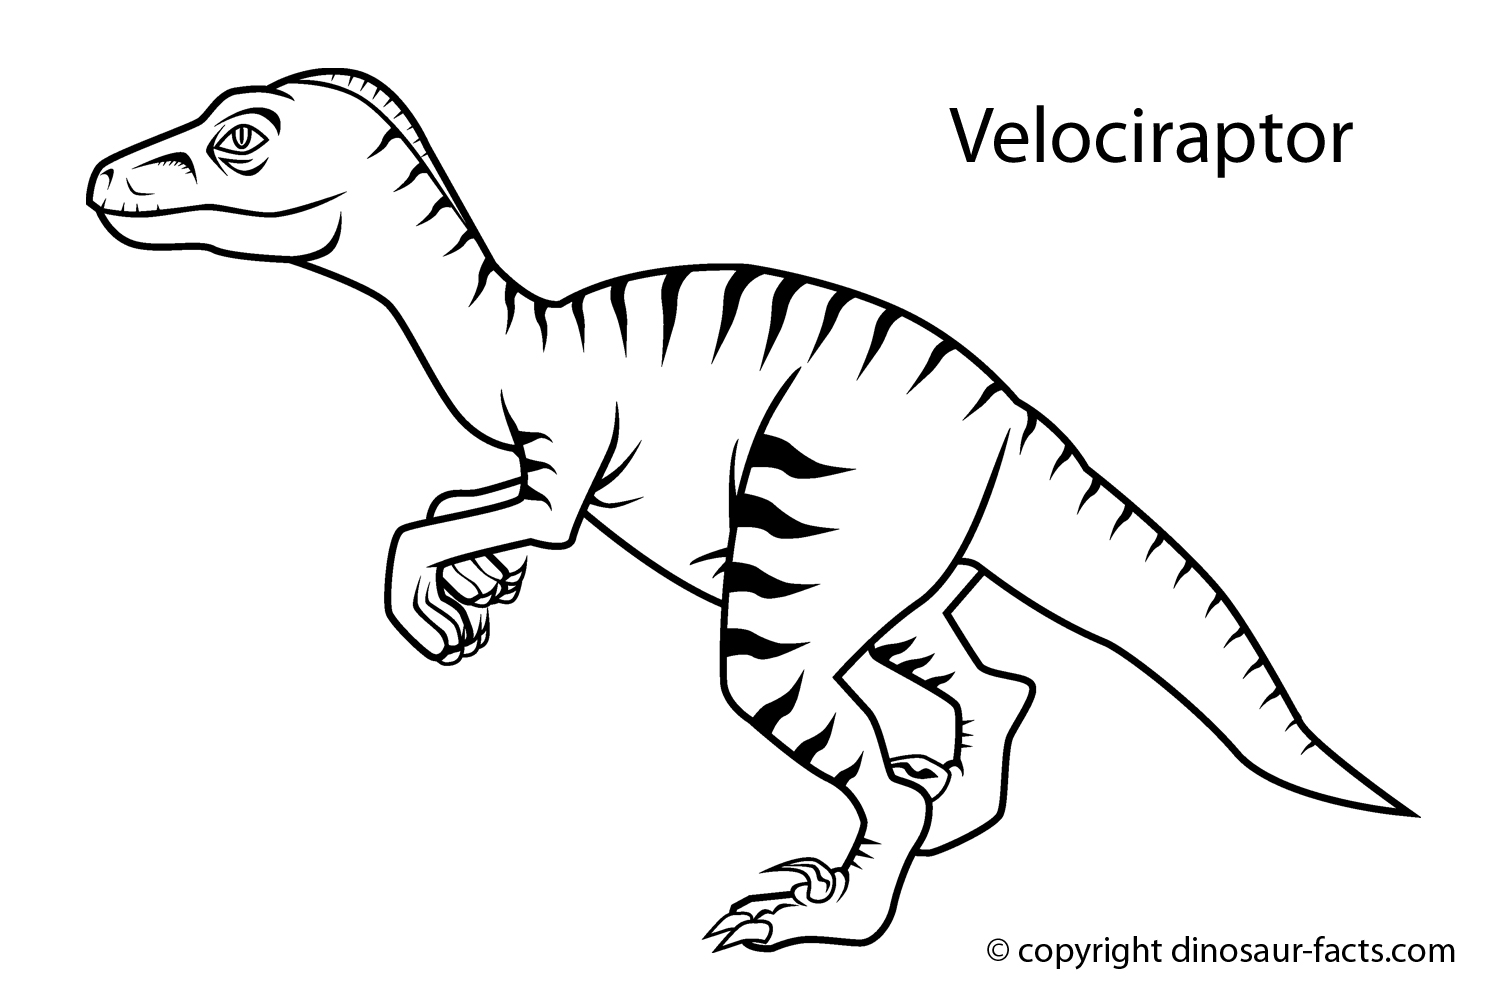 Terrible Lizards Dinosaurs coloring pages 17 Pictures and ...